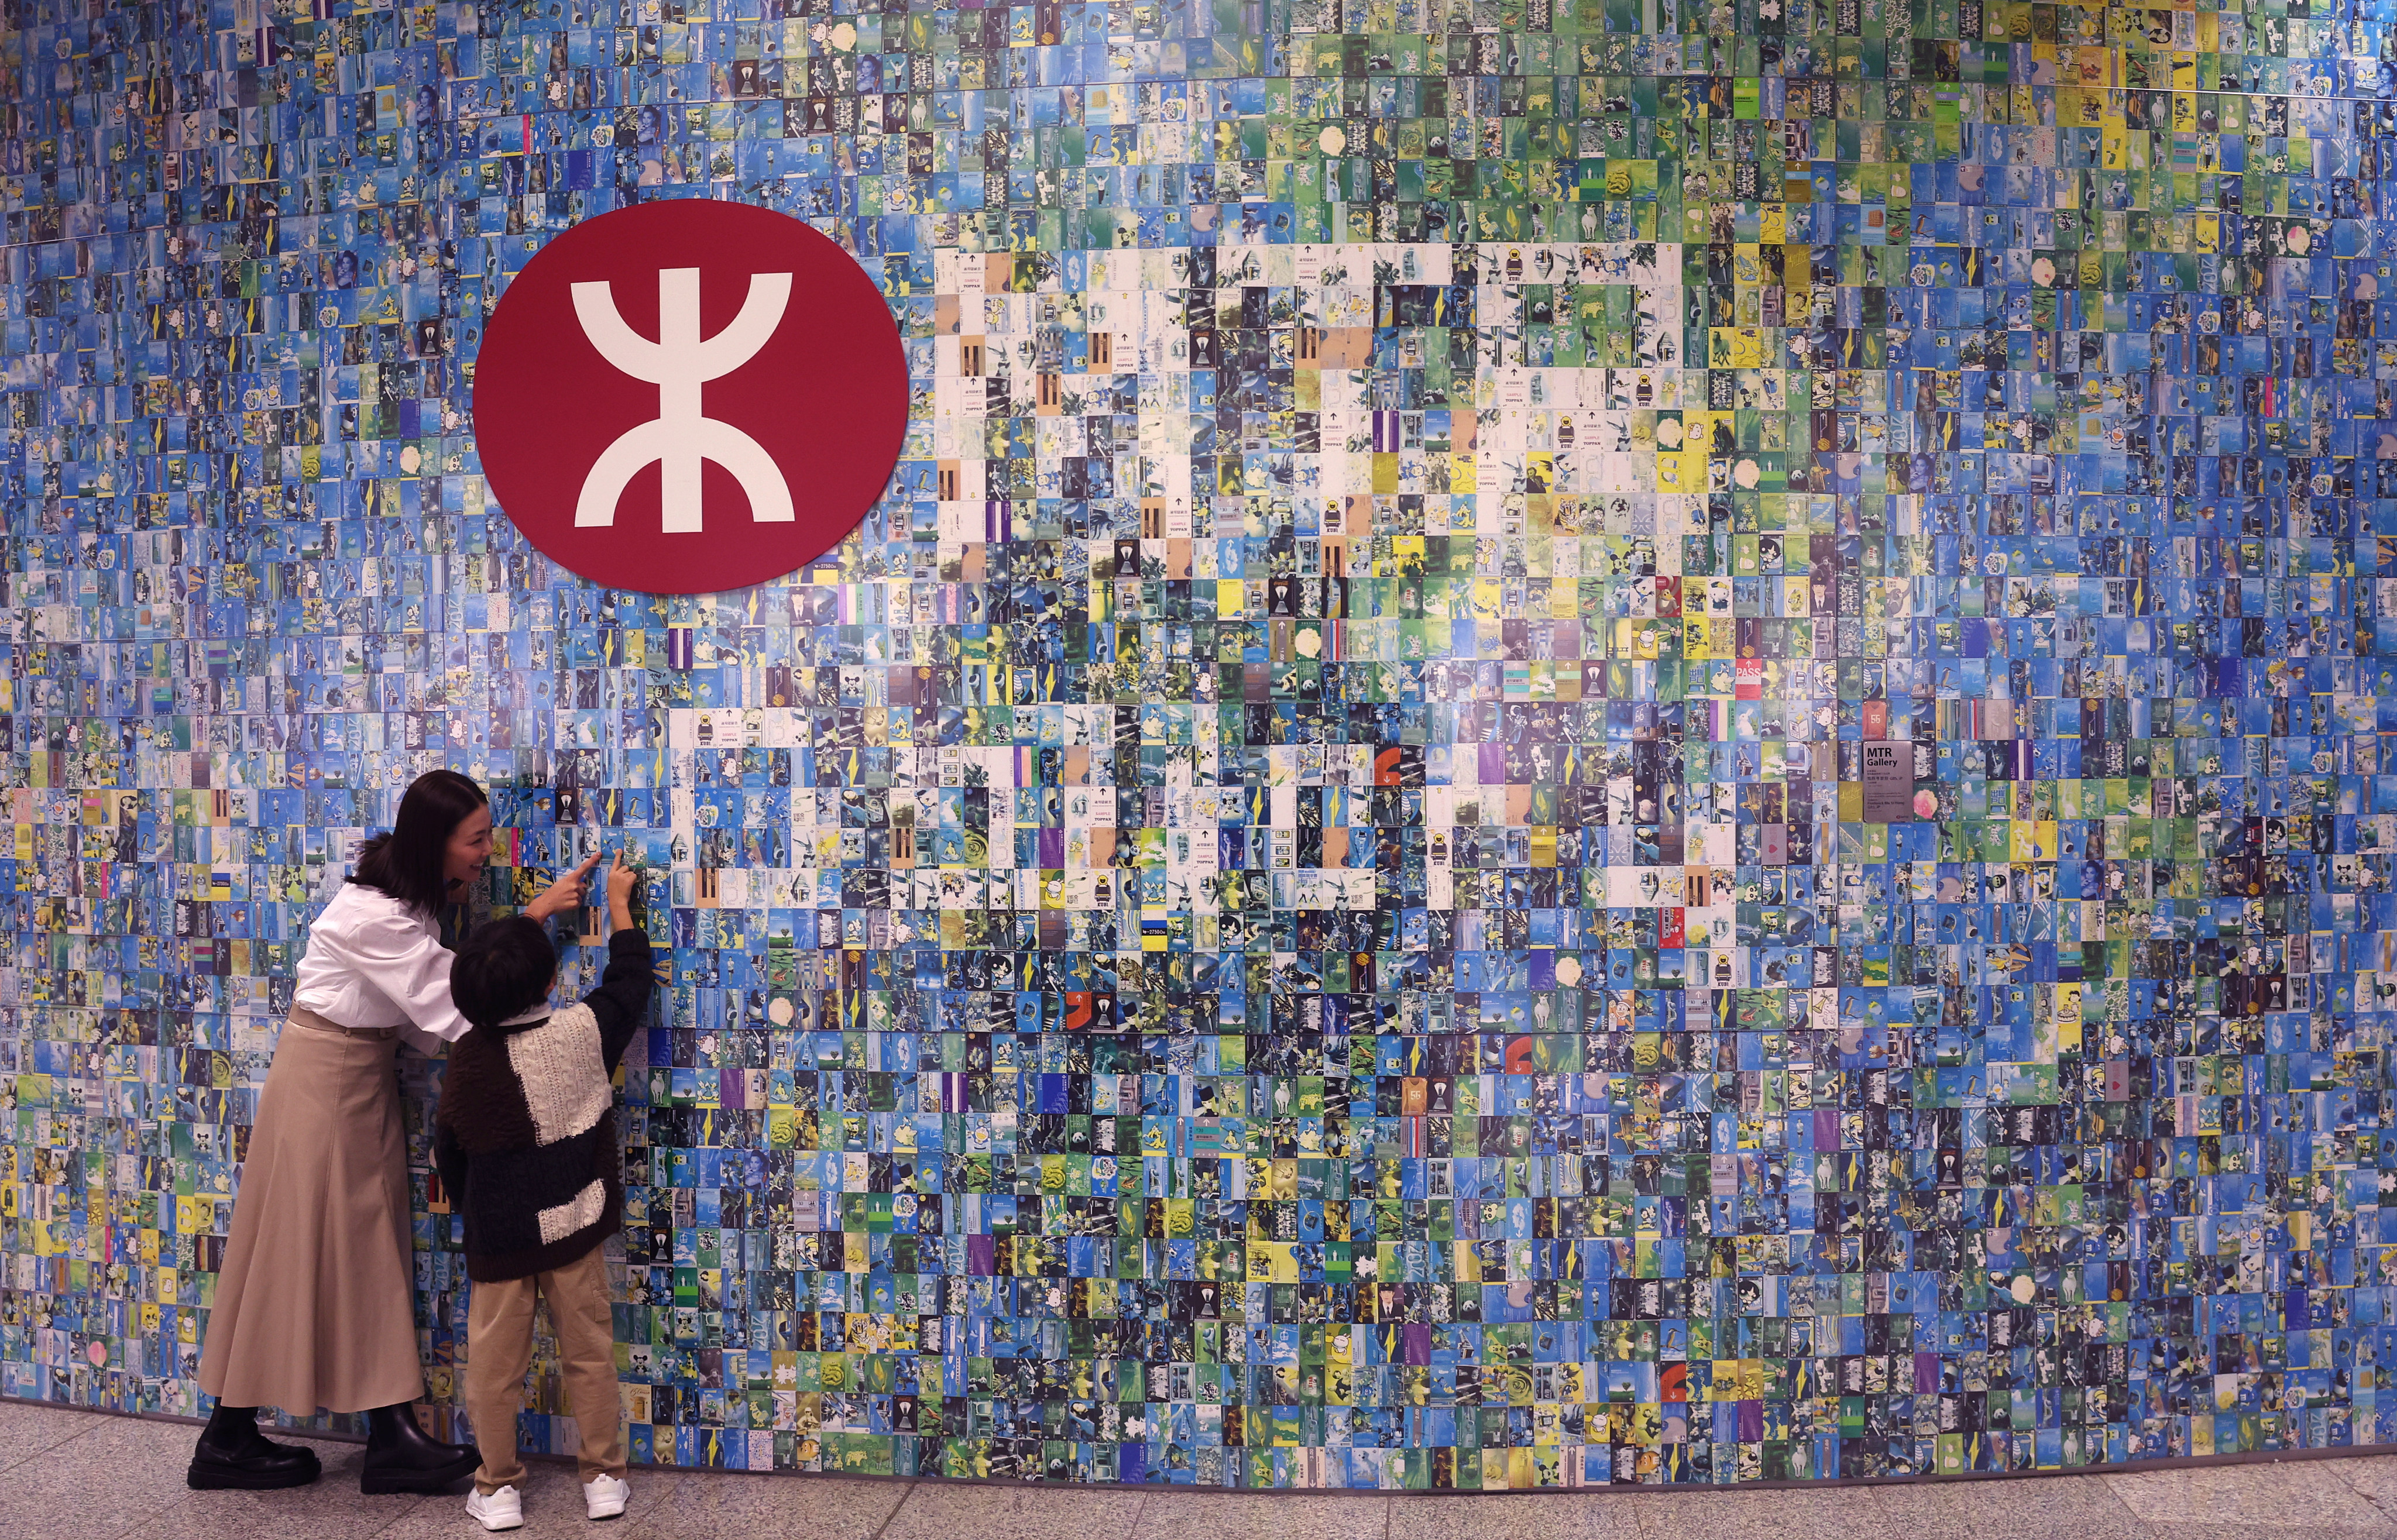 MTR Ticket Kaleidoscope displayed at MTR Gallery at MTR Kowloon Station. Photo: Edmond So